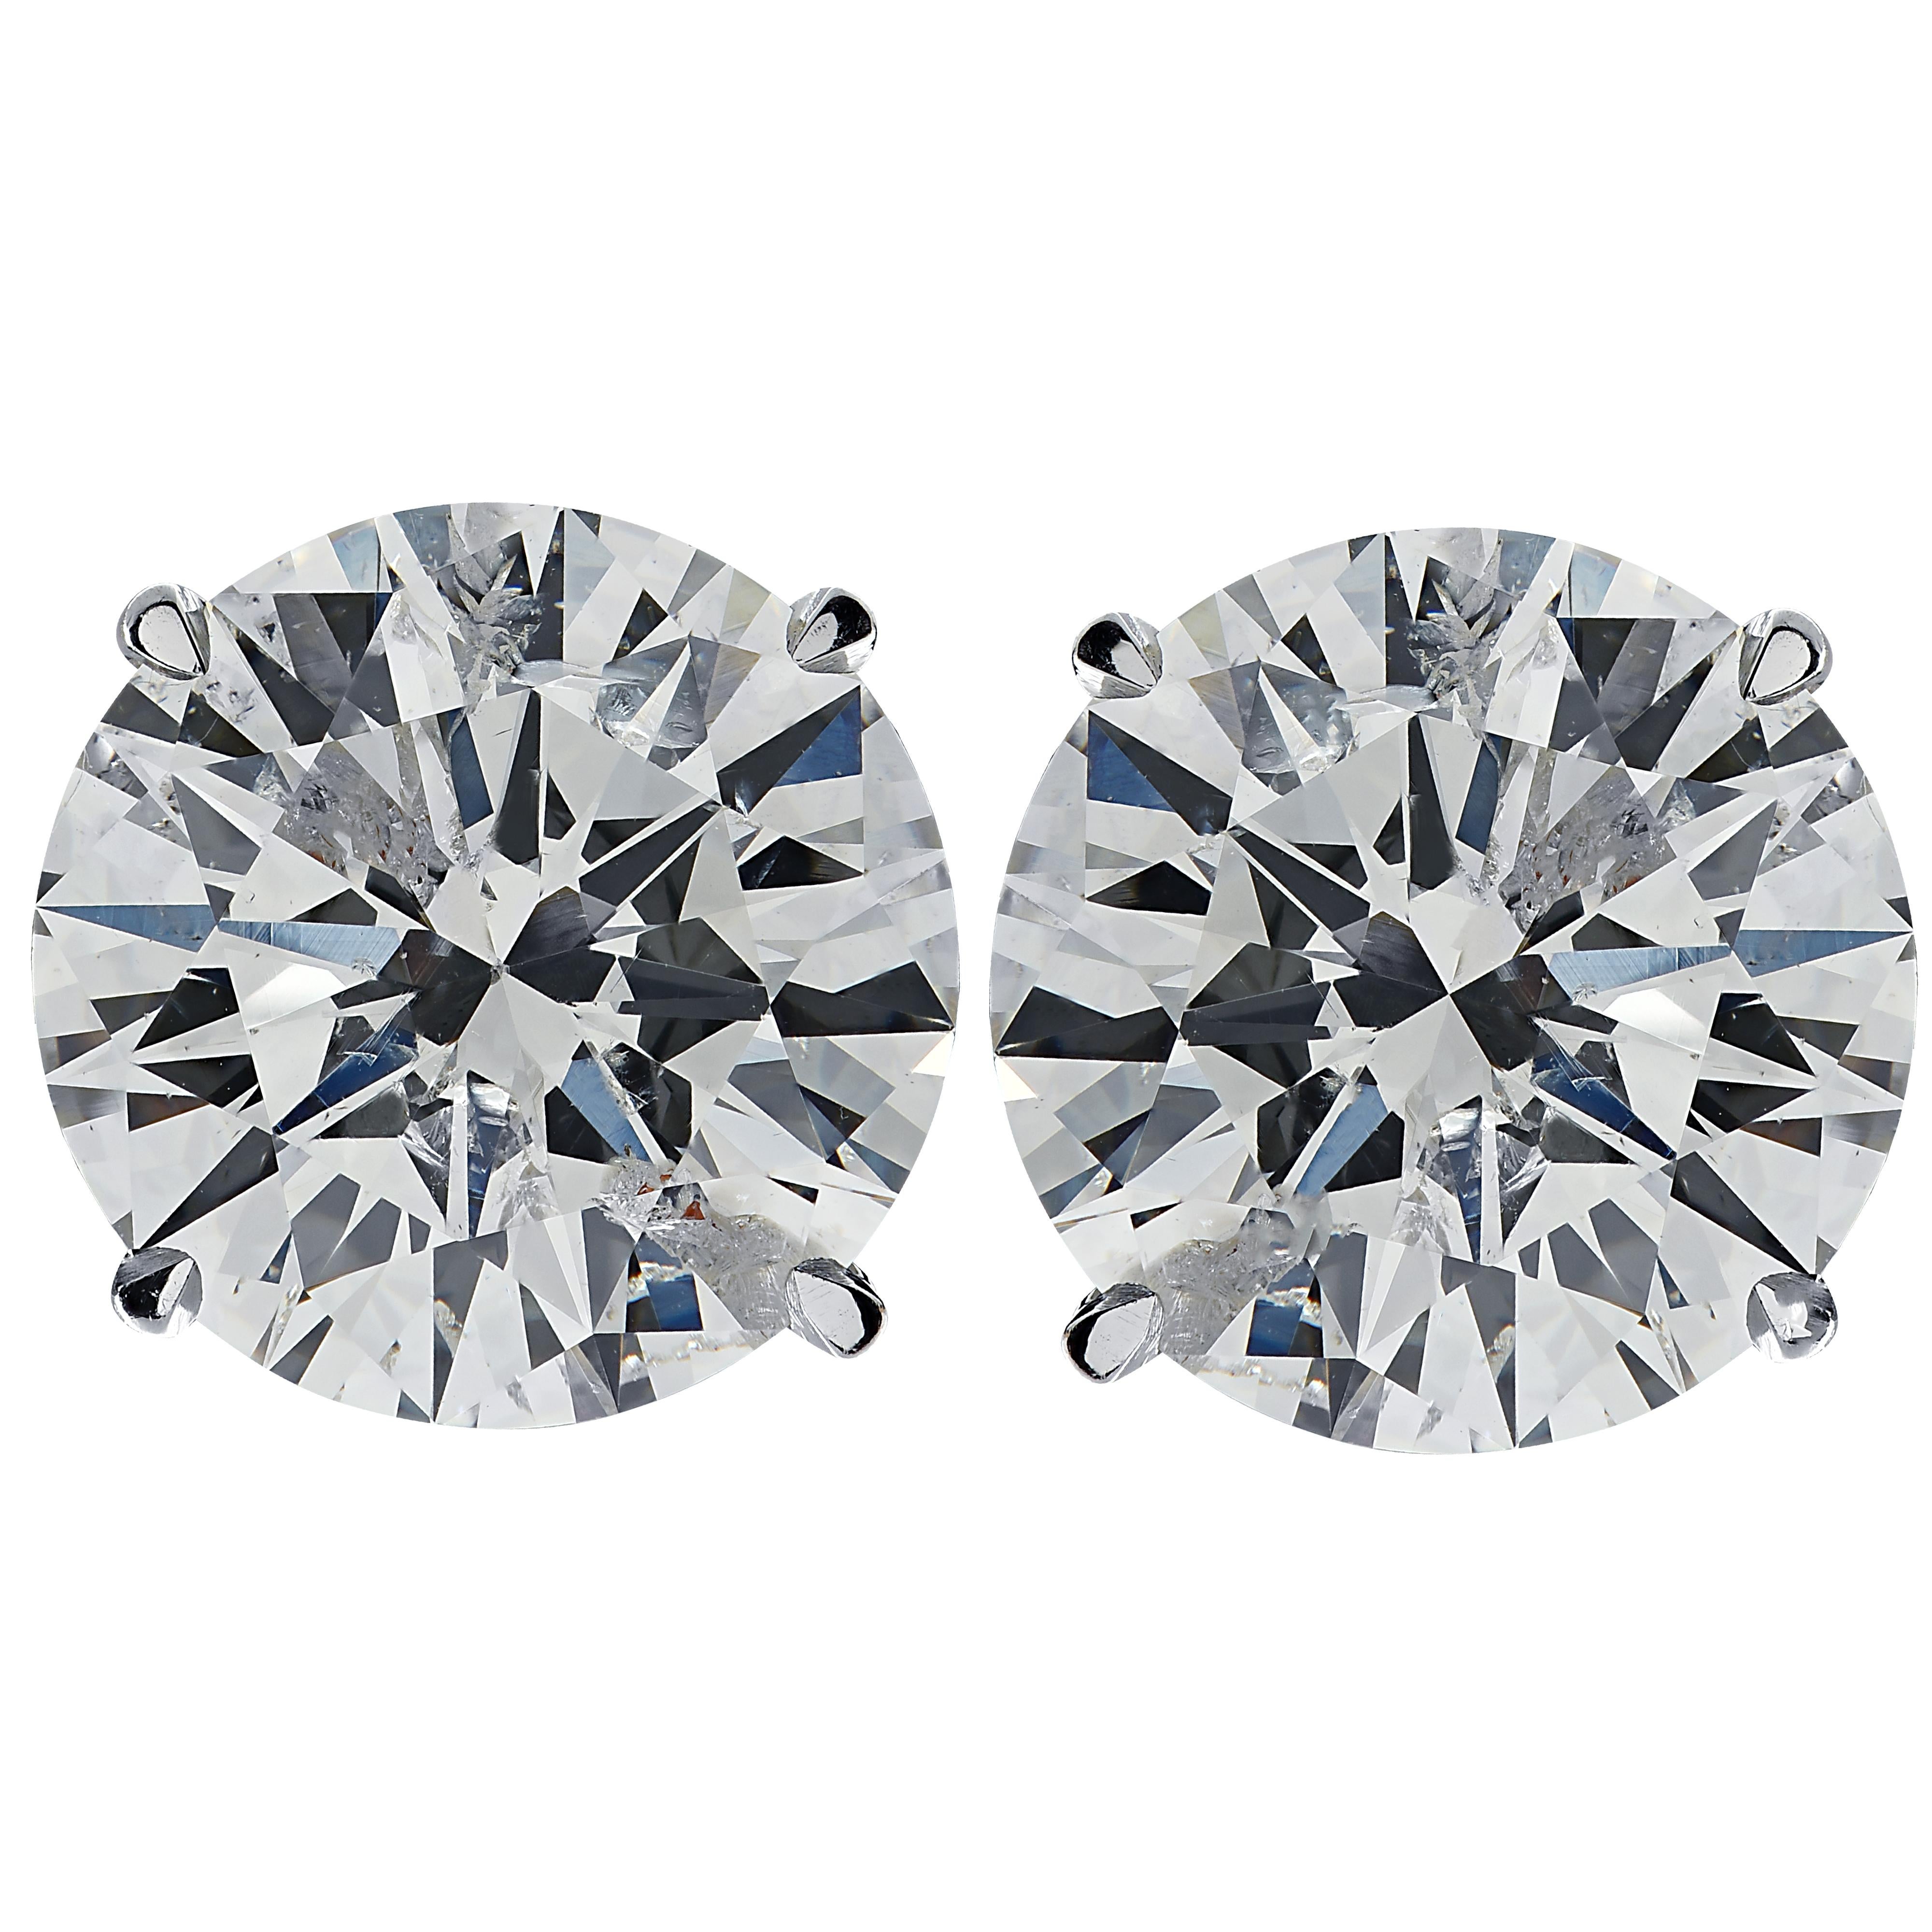 Stunning Vivid Diamonds solitaire stud earrings crafted in 18 karat white gold, showcasing 2 round brilliant cut diamonds weighing 2.56 carats total, G-H color SI clarity. These diamonds were carefully selected and perfectly matched to create these